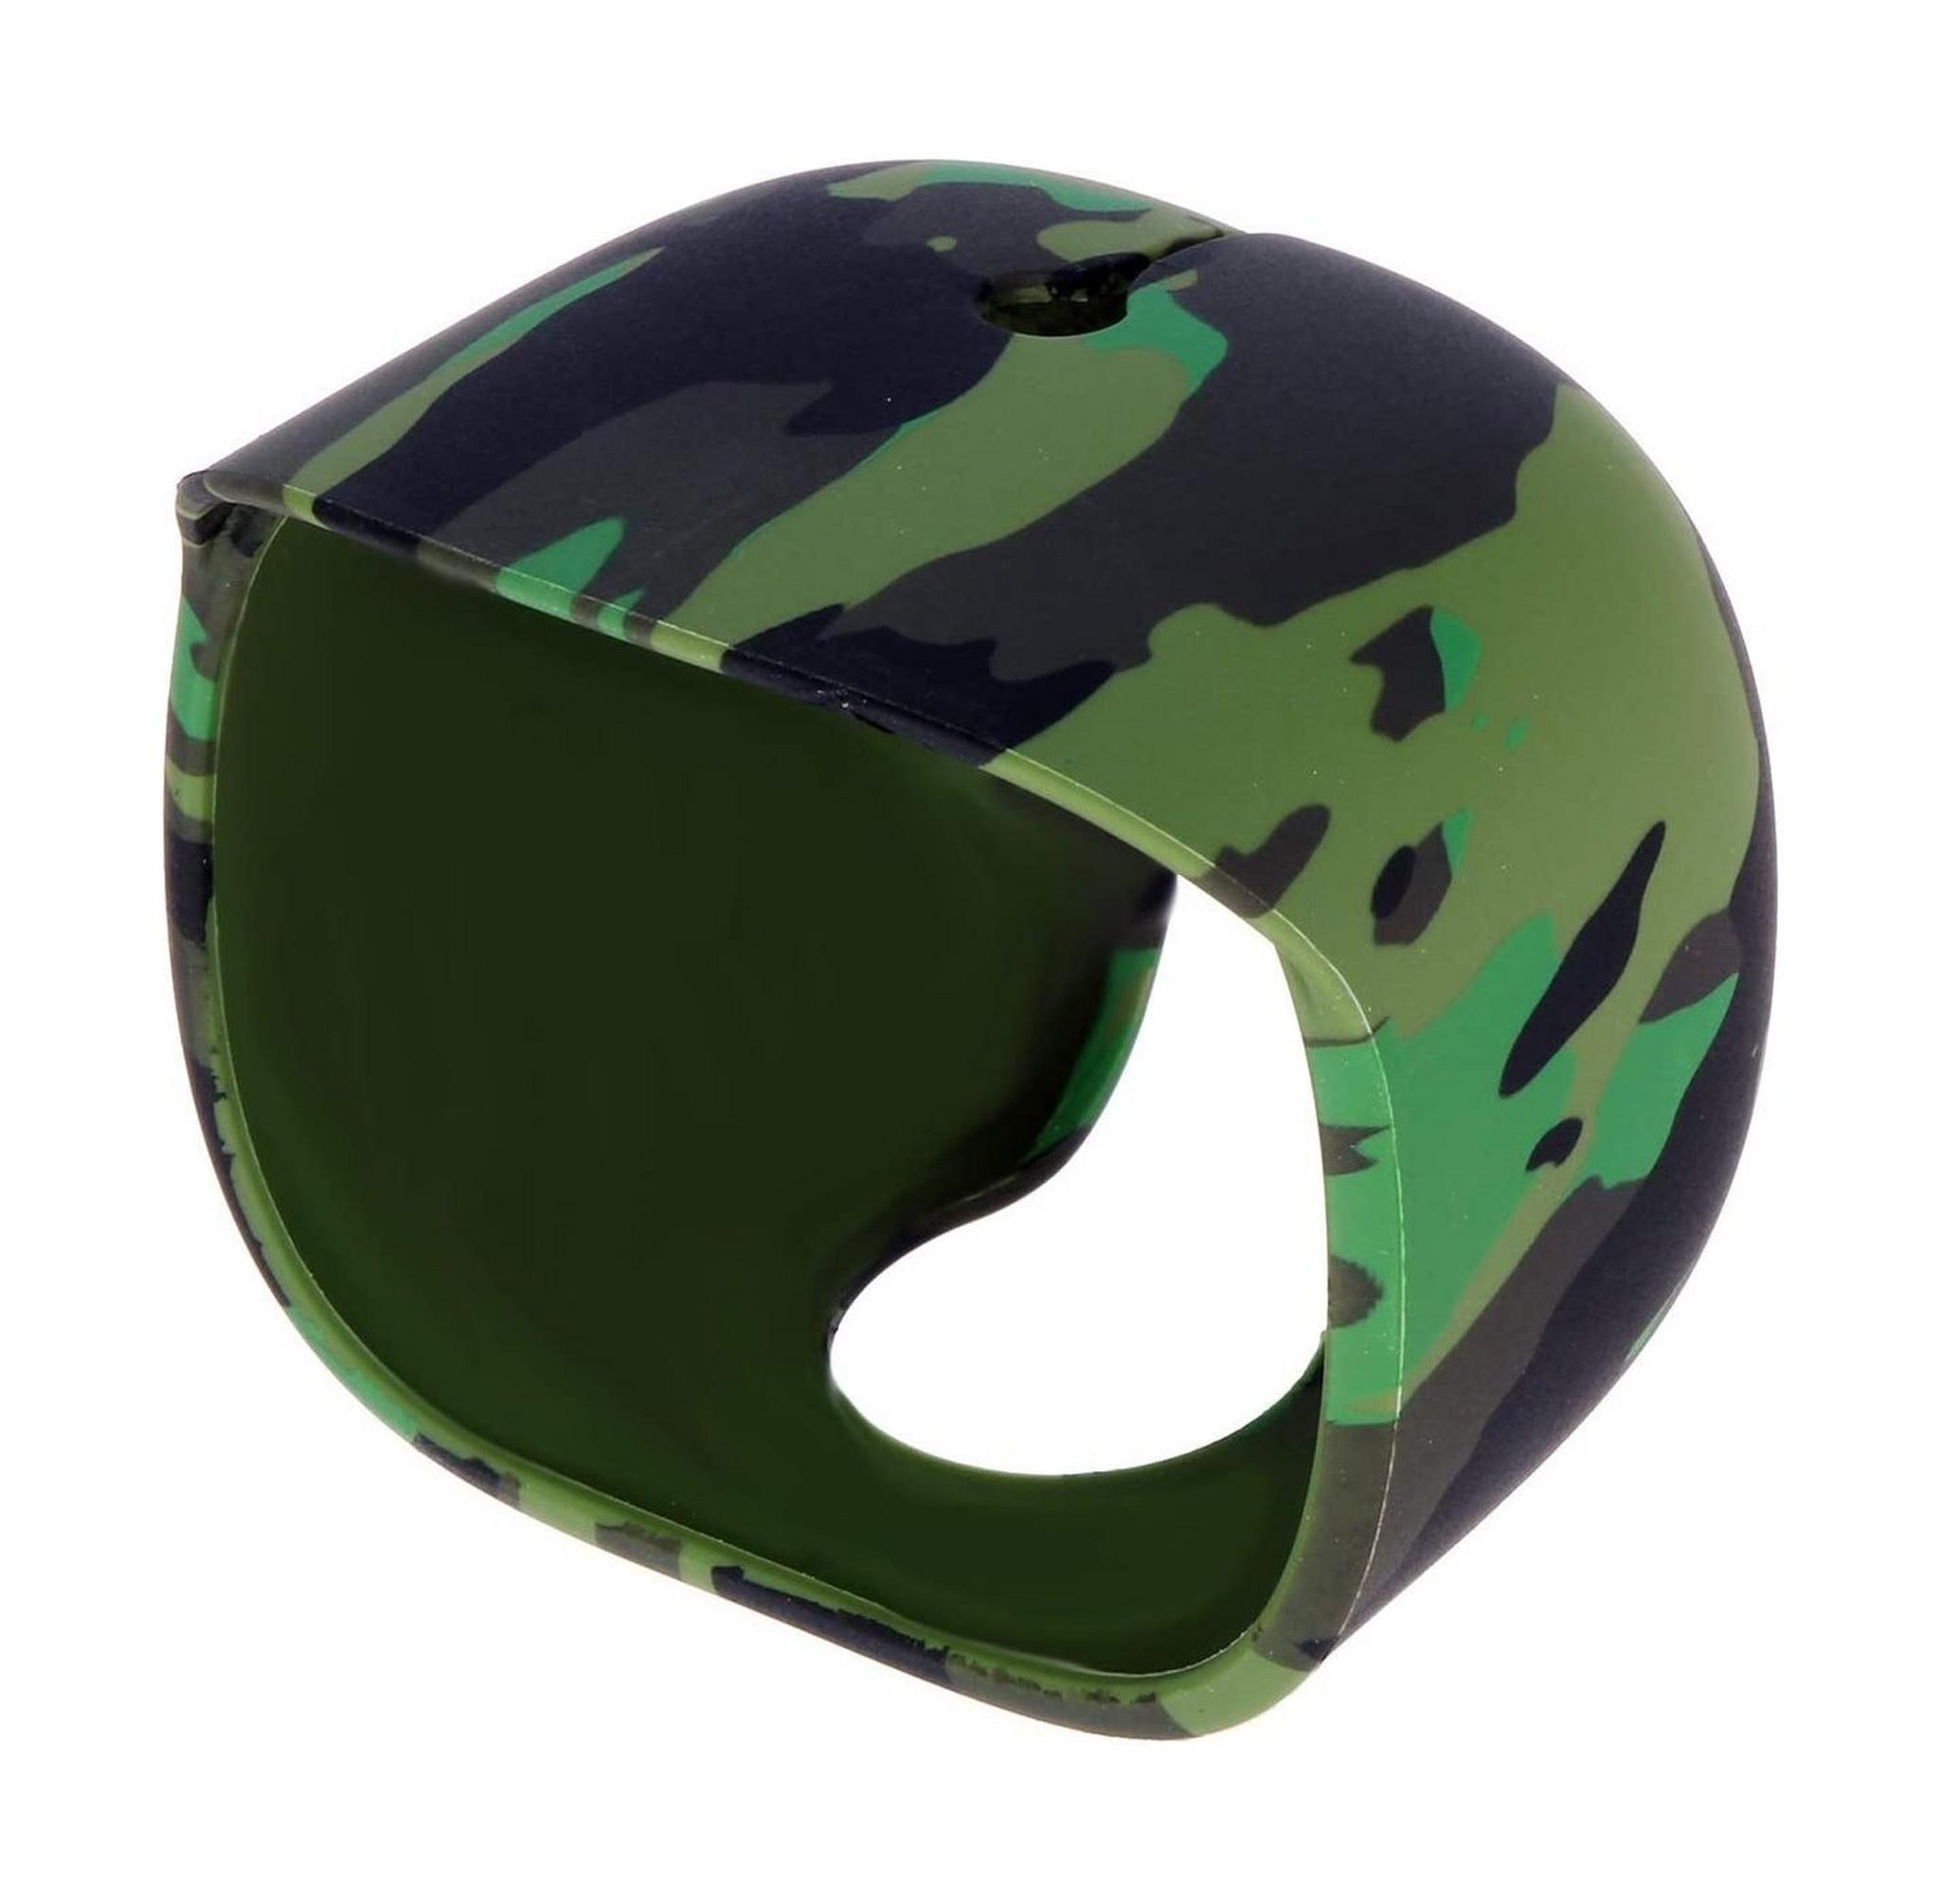 IMOU Looc CCTV Silicone Cover - Camouflage